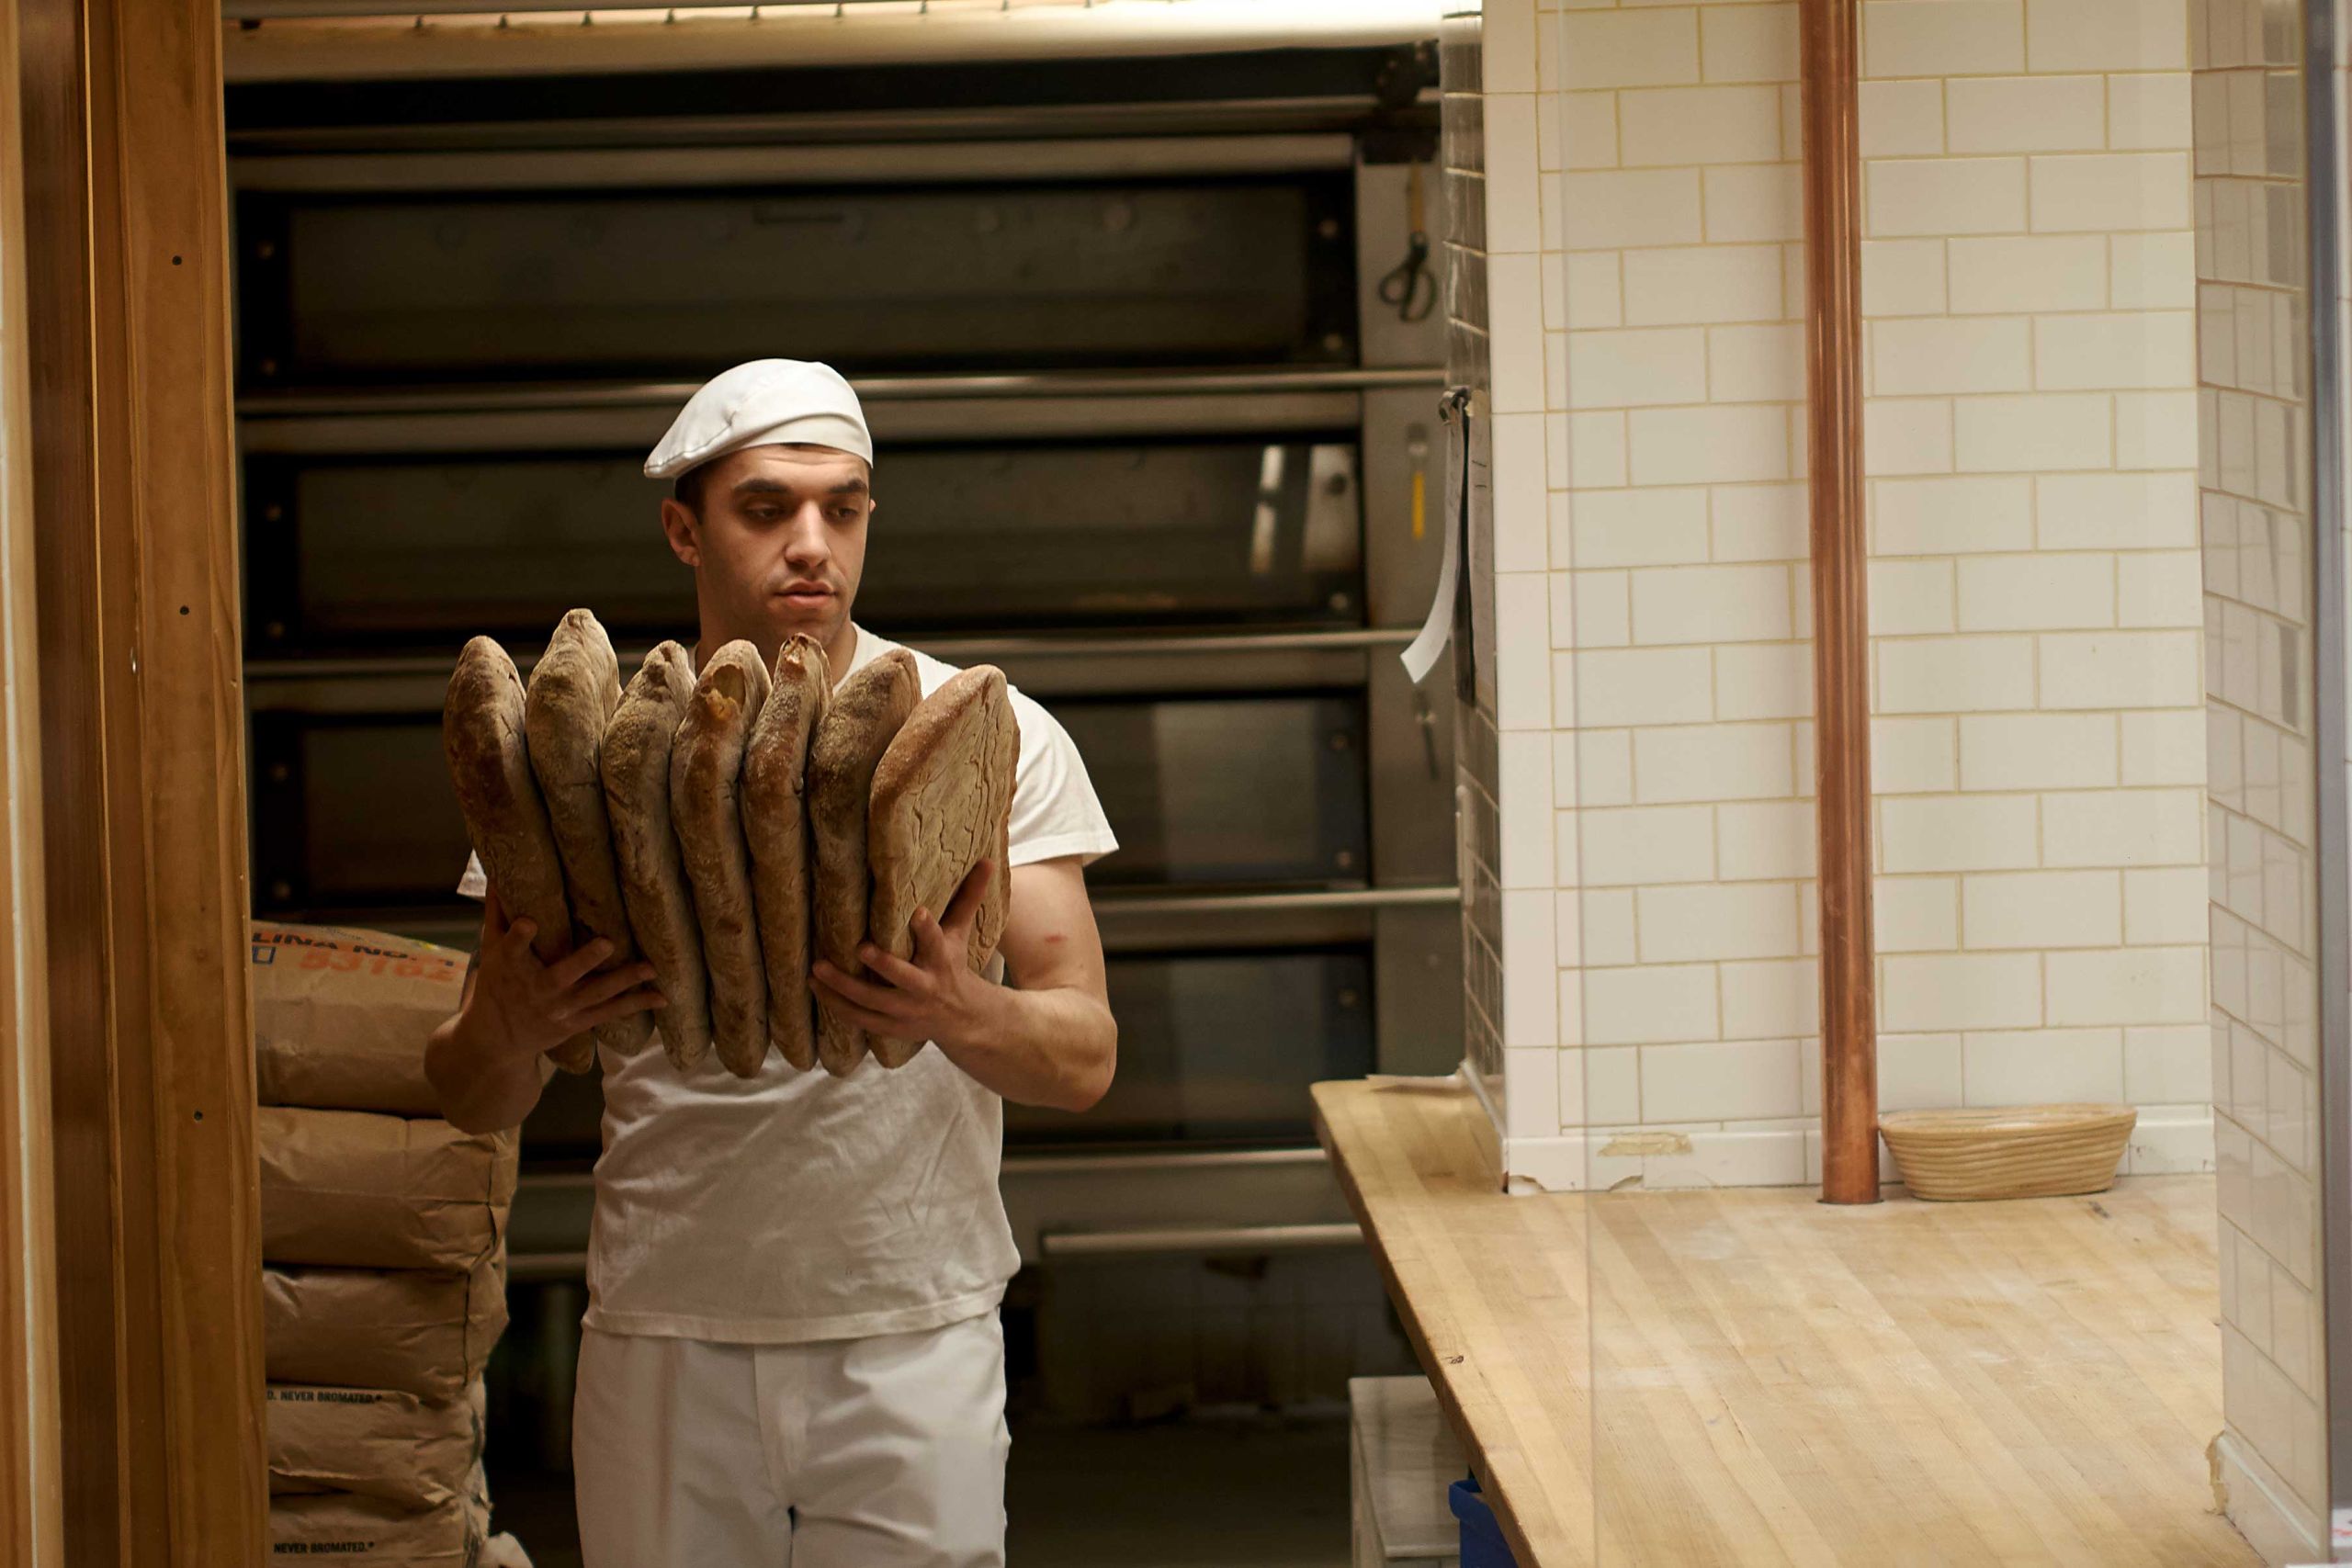 A baker walks from the oven carrying loaves of bread.